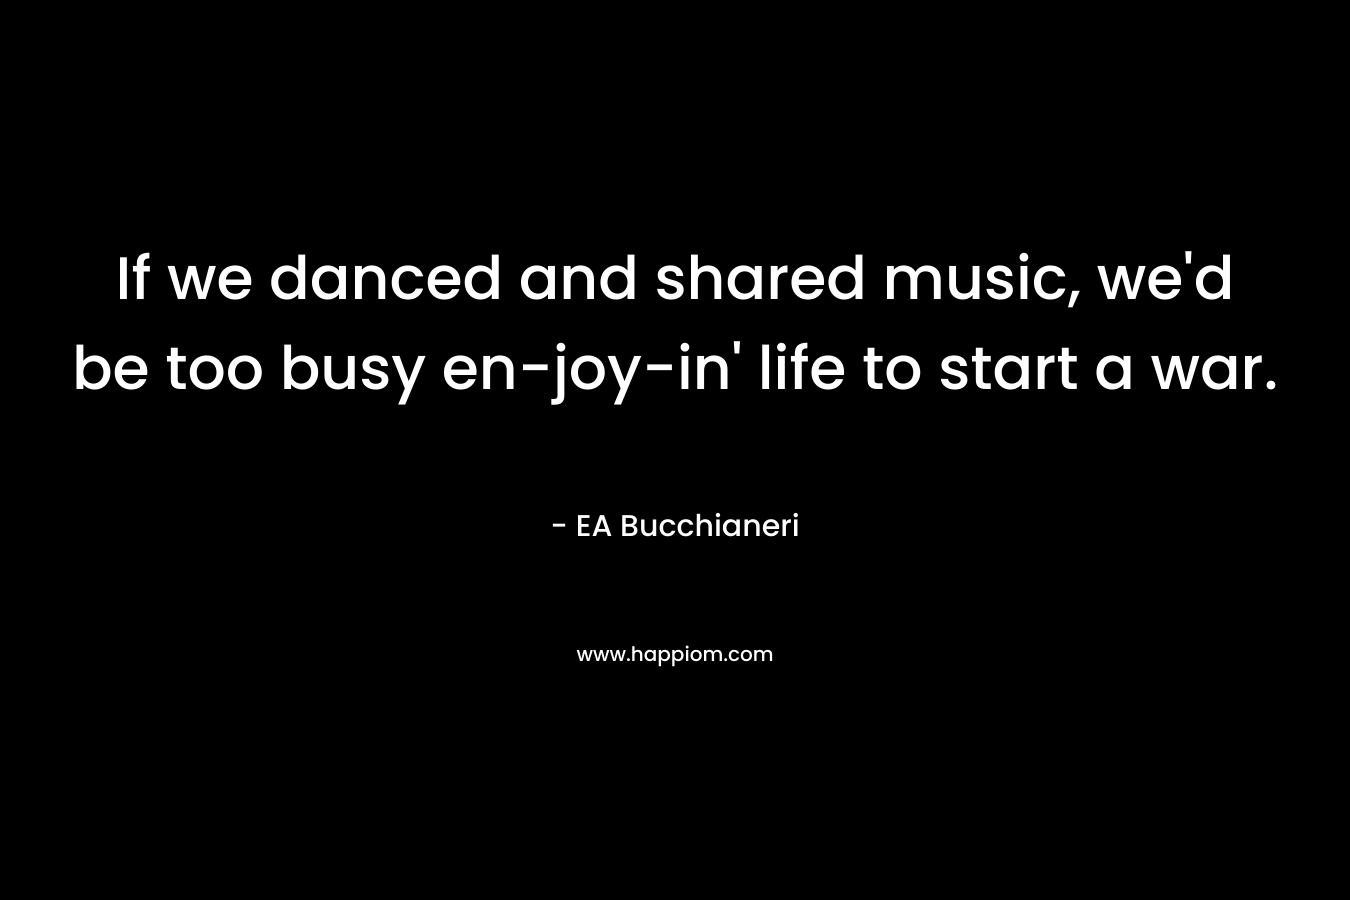 If we danced and shared music, we’d be too busy en-joy-in’ life to start a war. – EA Bucchianeri